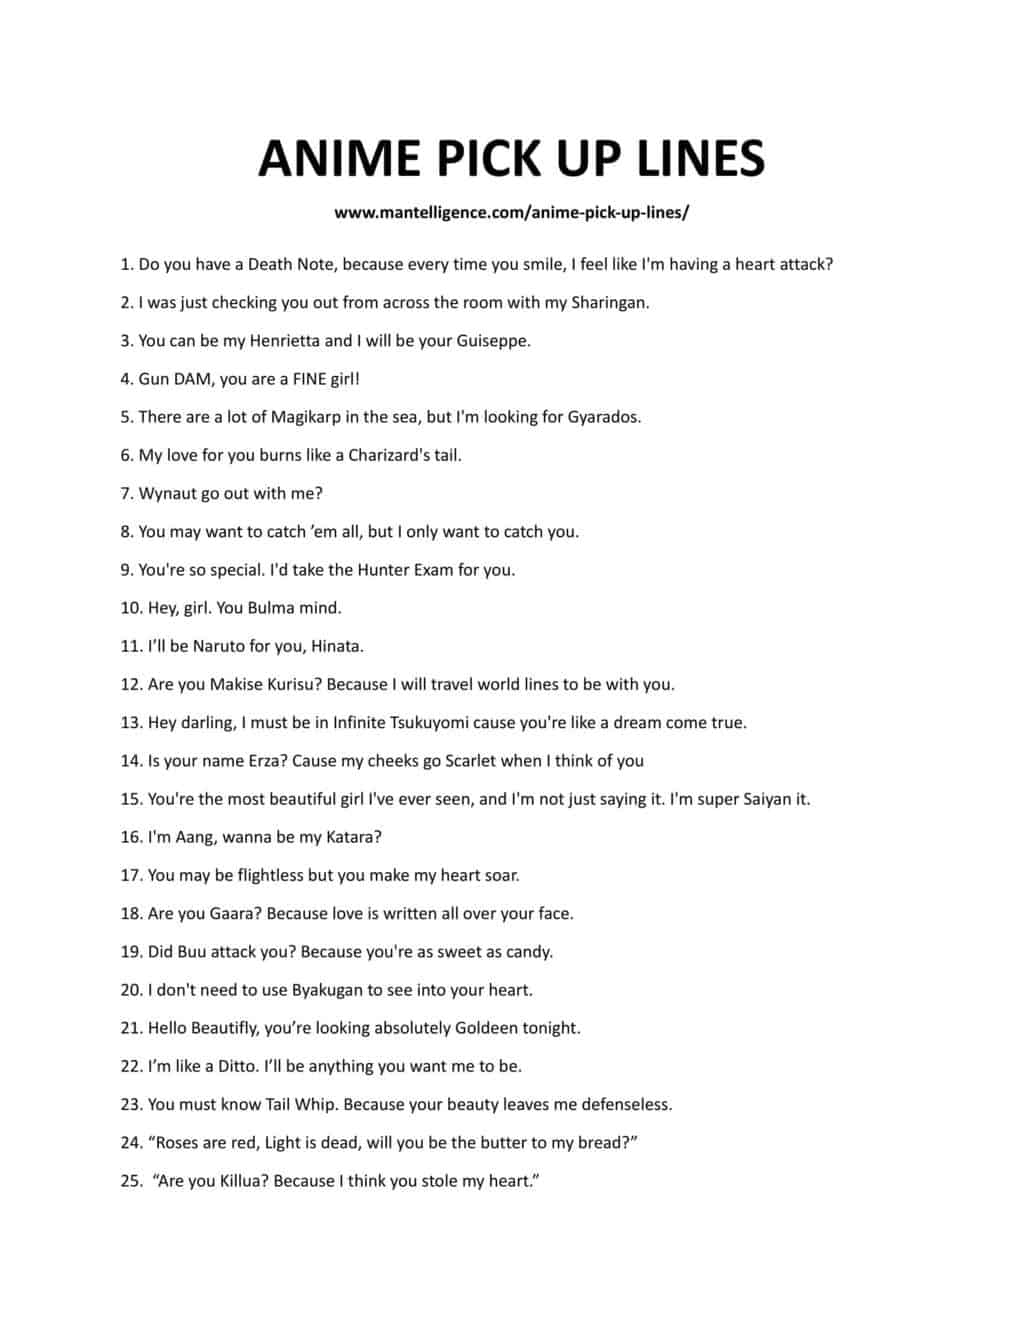 Downloadable list of pick up lines